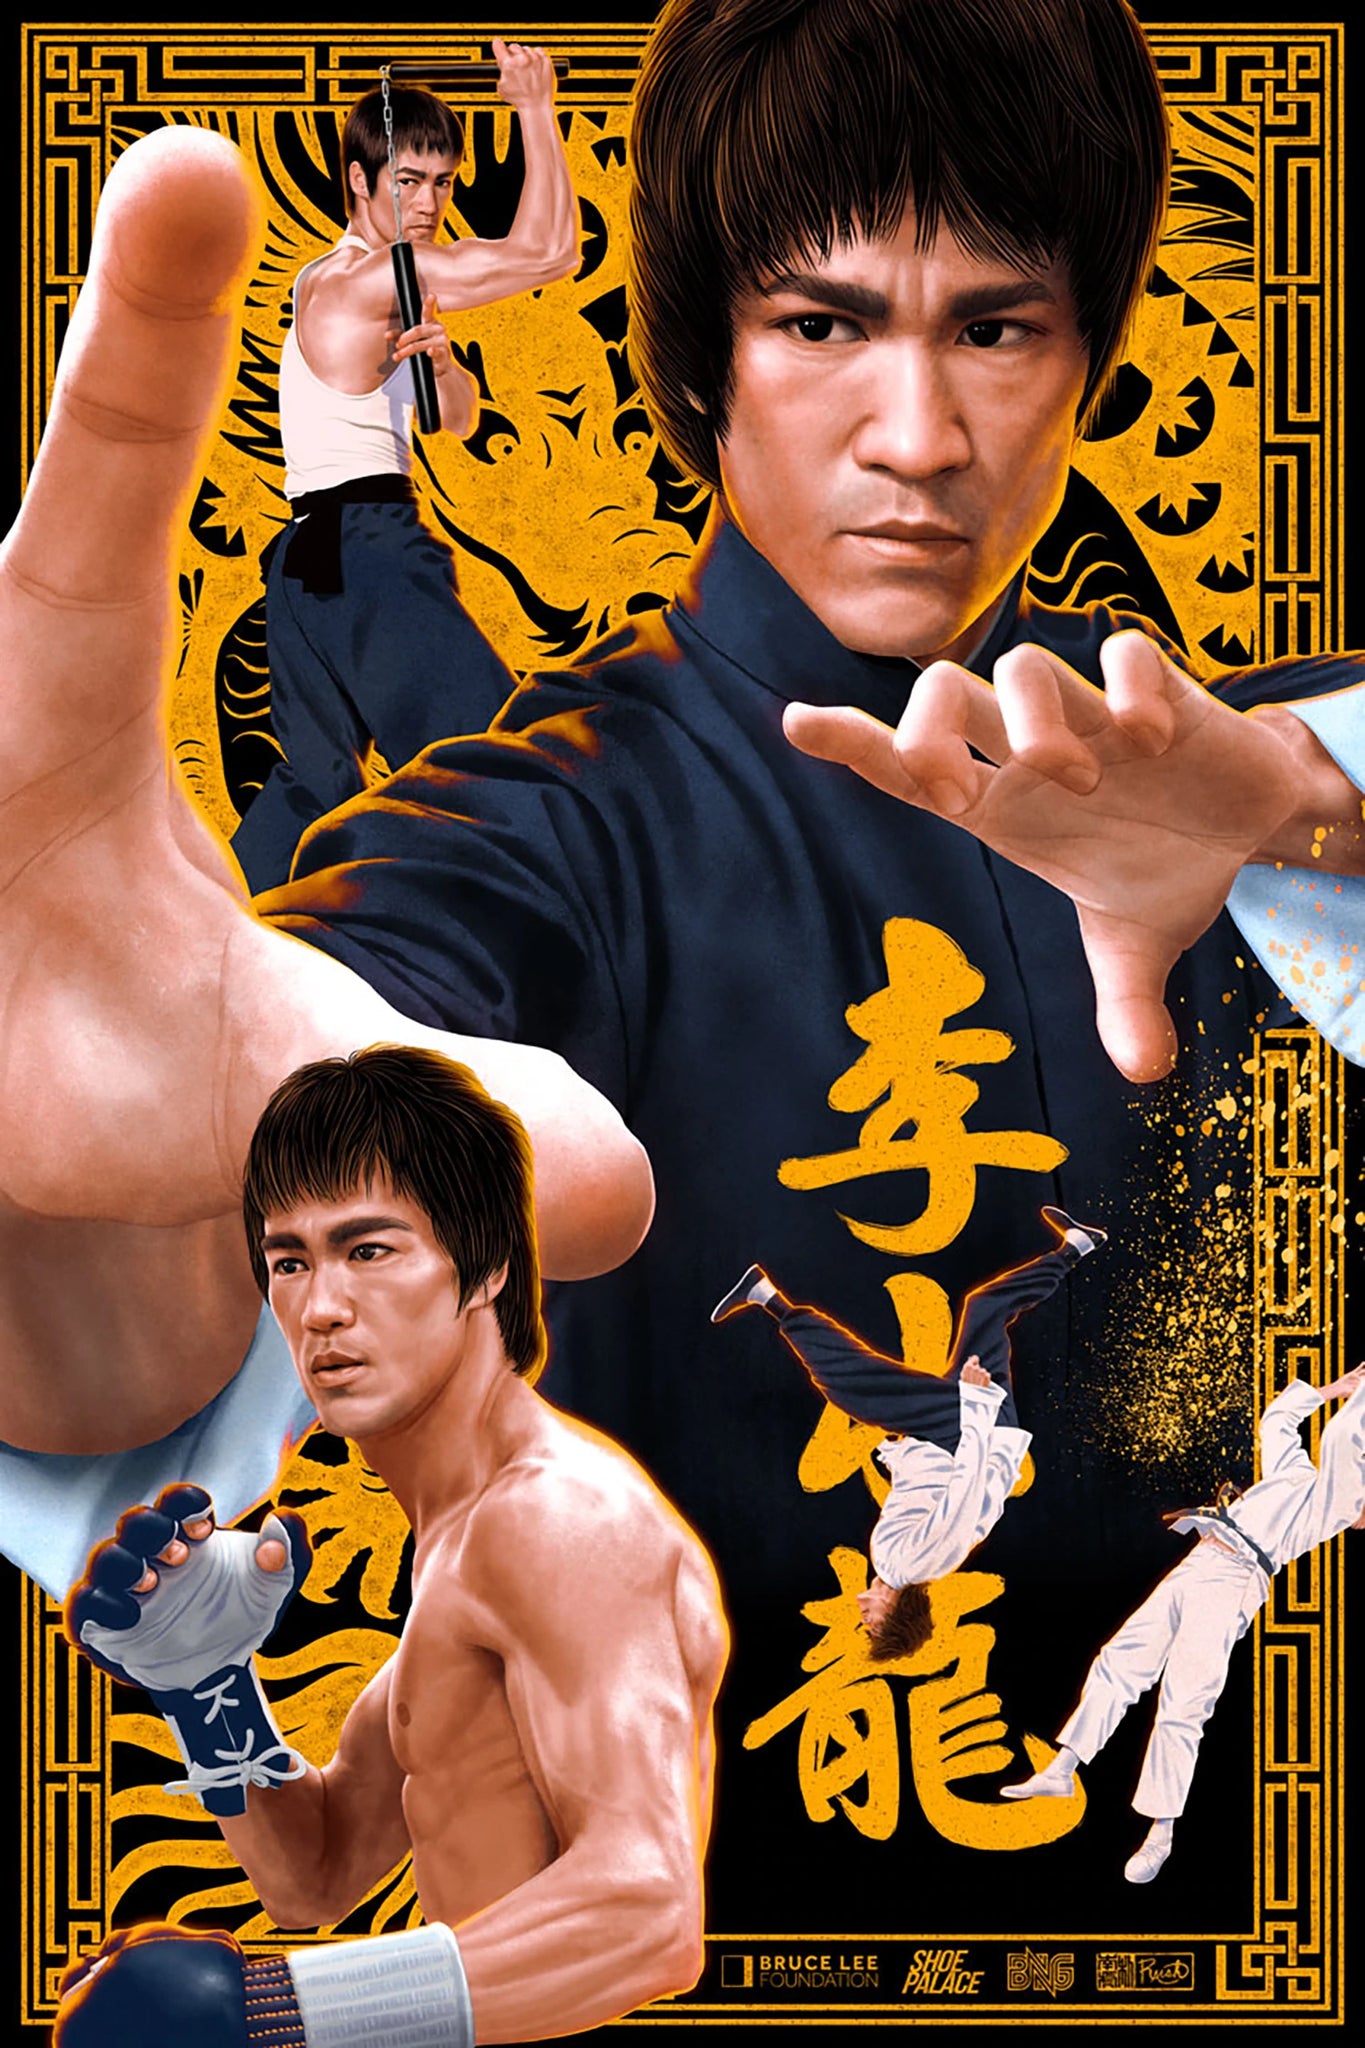 BRUCE LEE the Variant